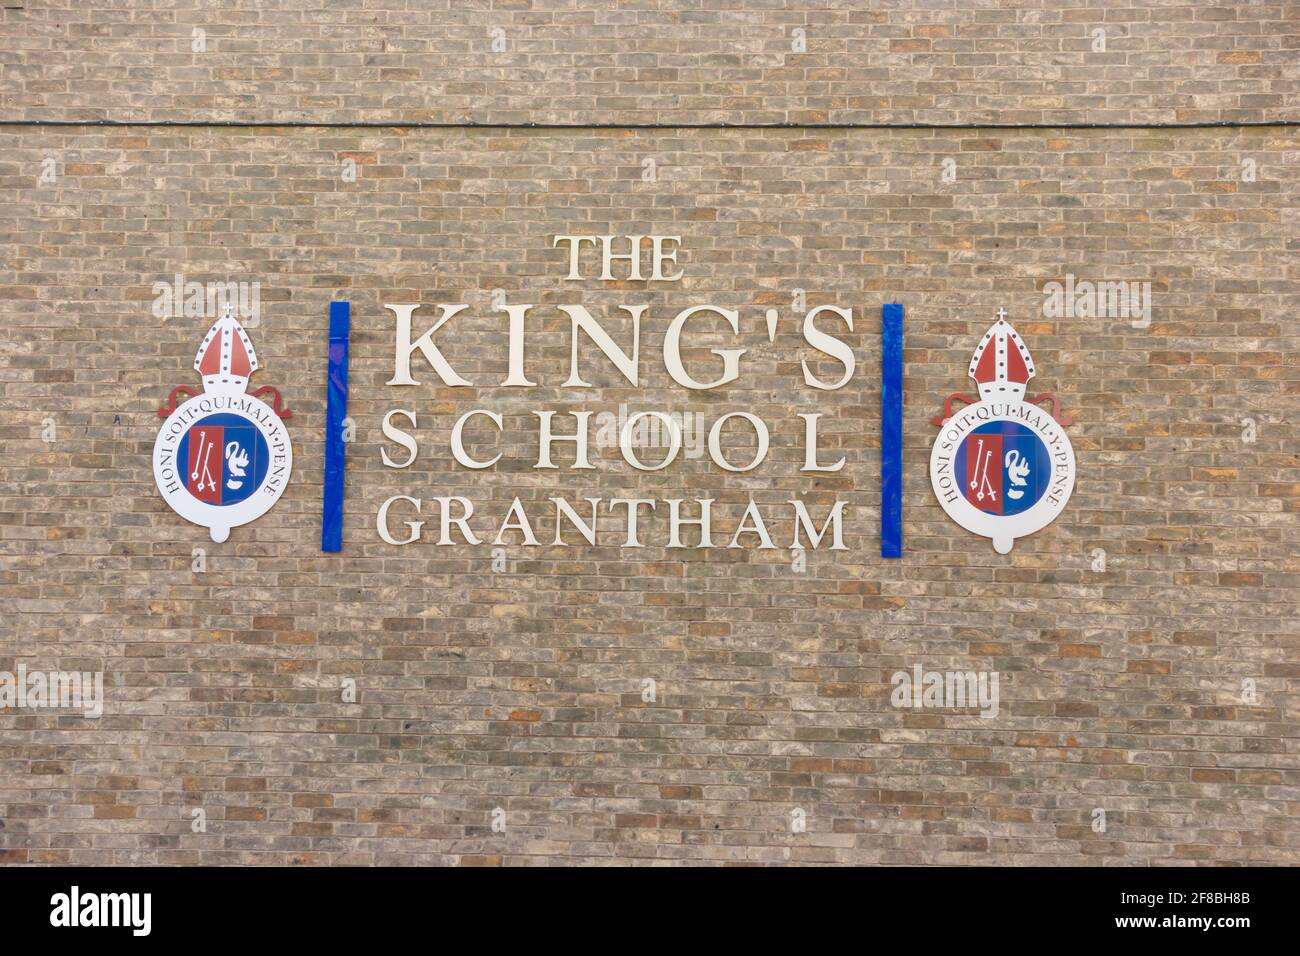 The Kings School Grantham, grammar school logo and sign on a brick wall. Grantham, Lincolnshire, England Stock Photo